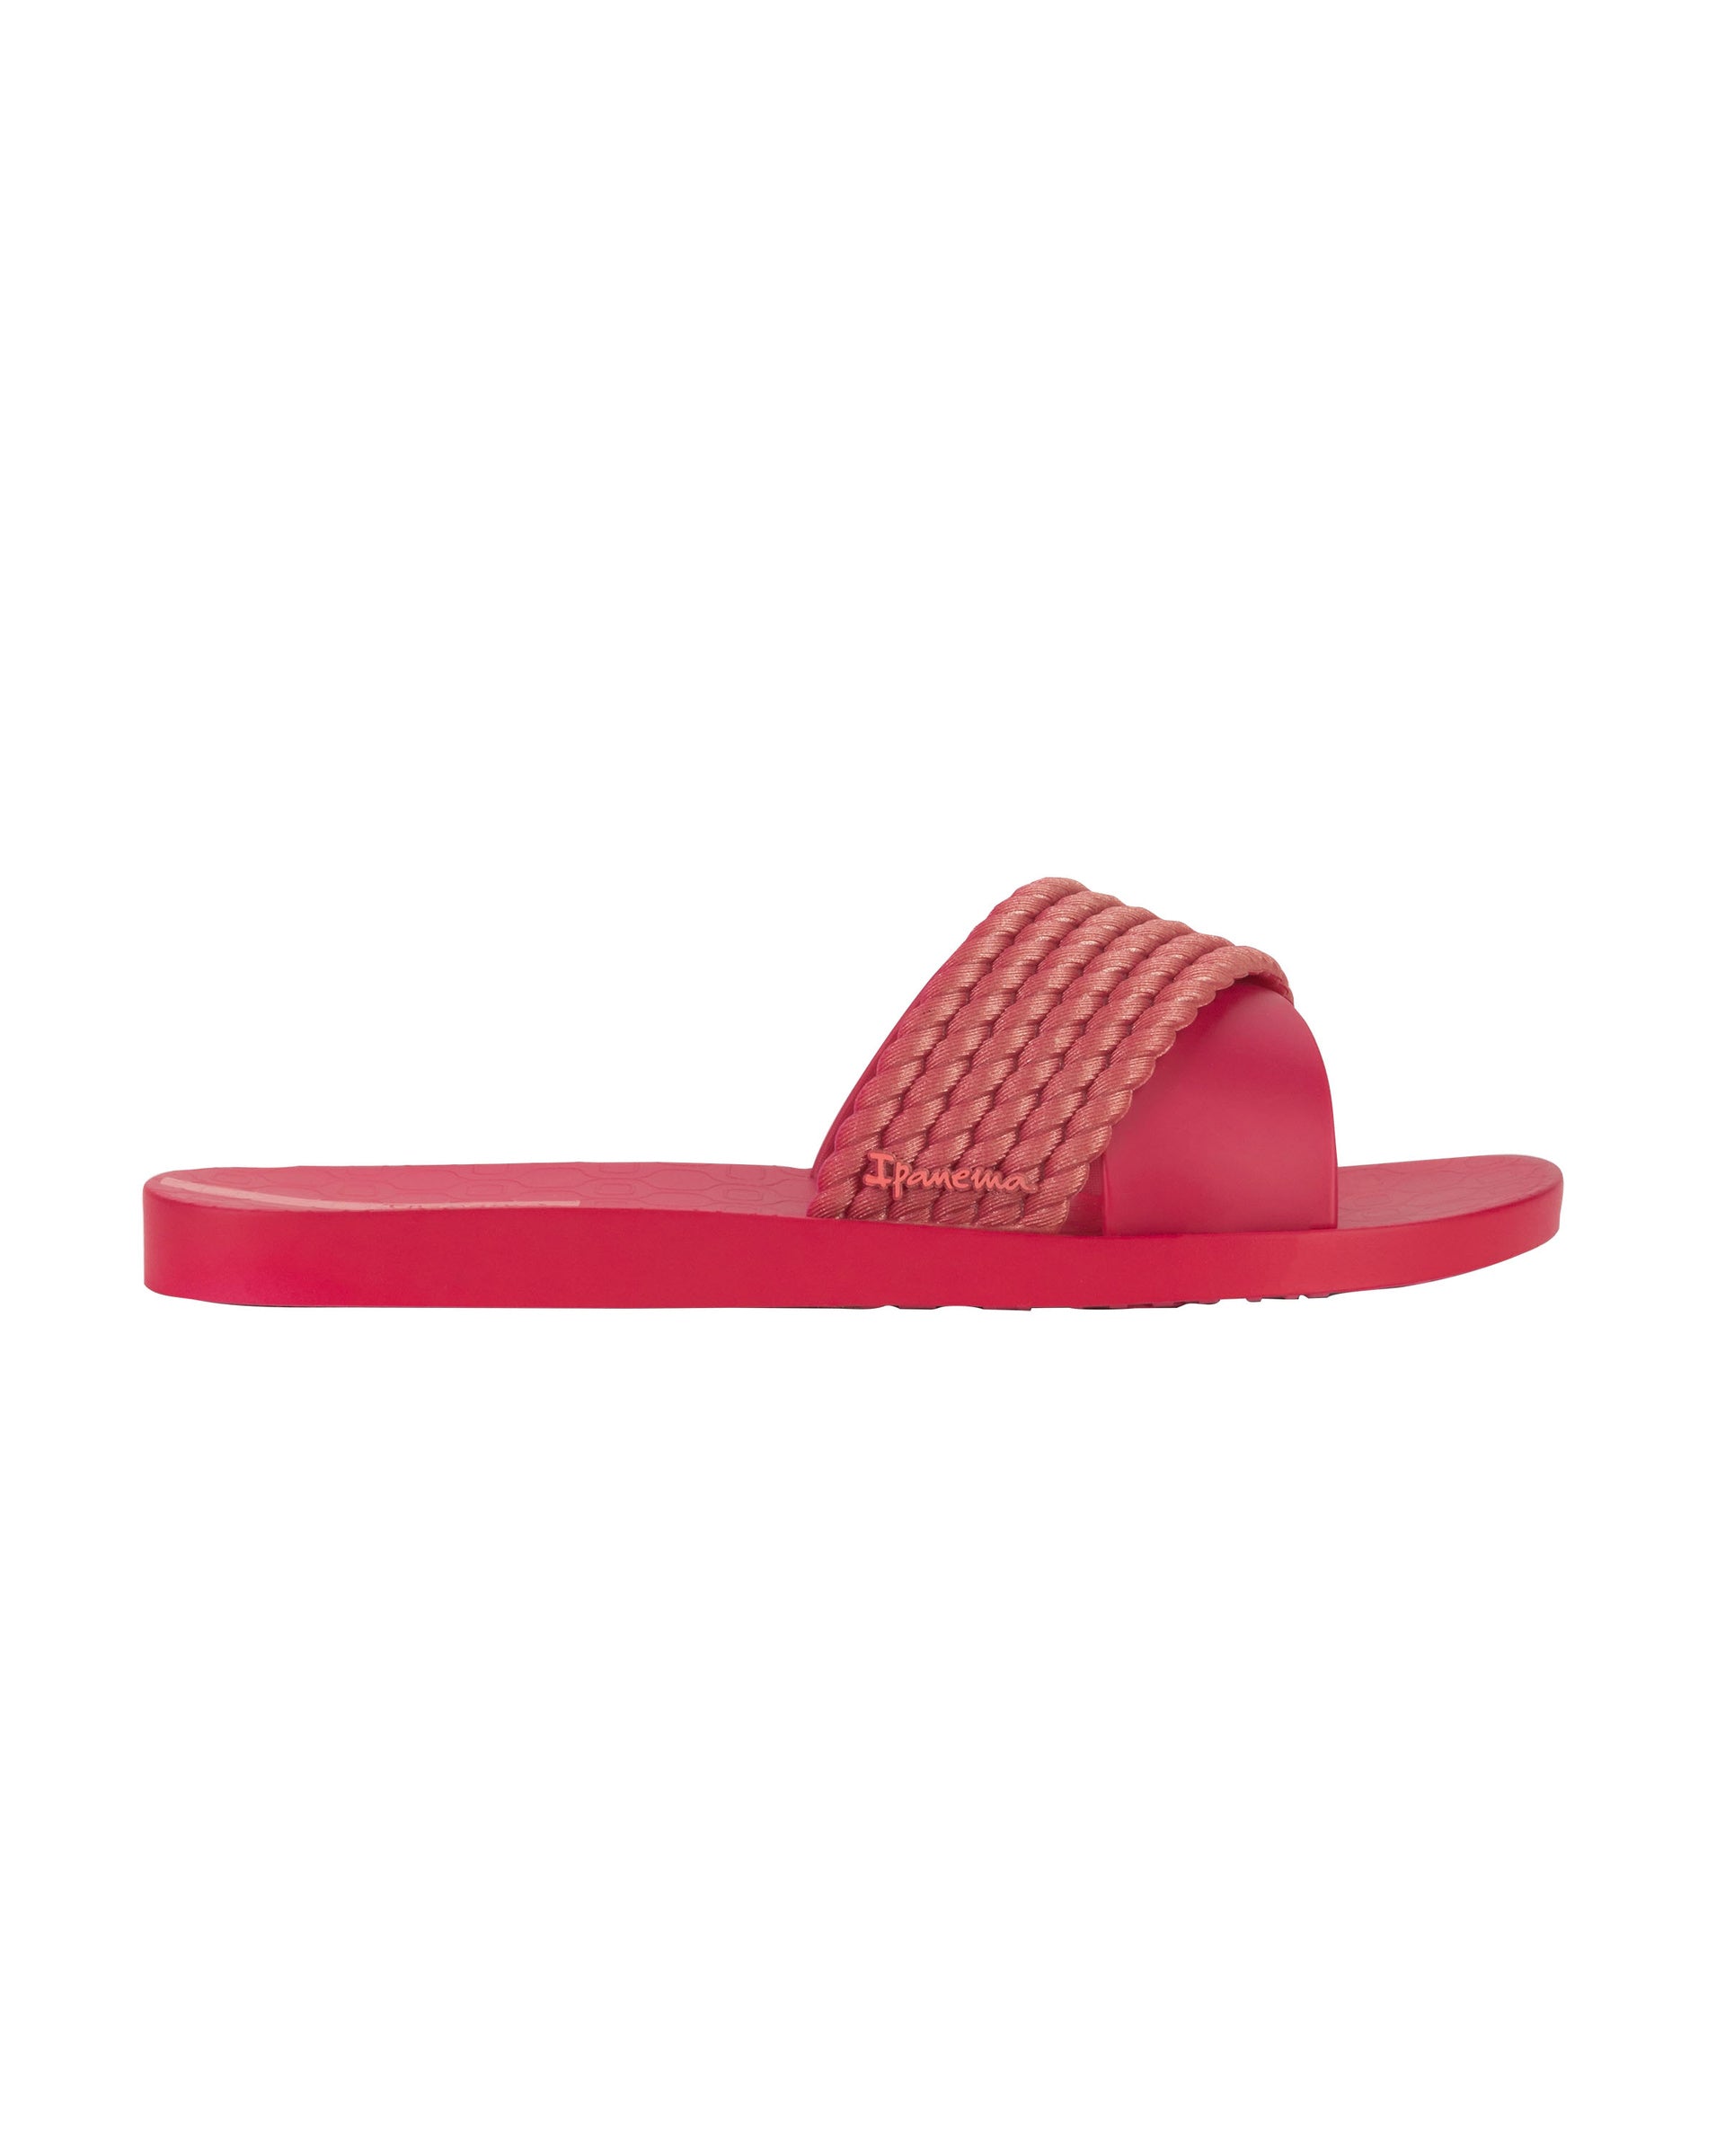 Outer side view of a red Ipanema Street women's slide.